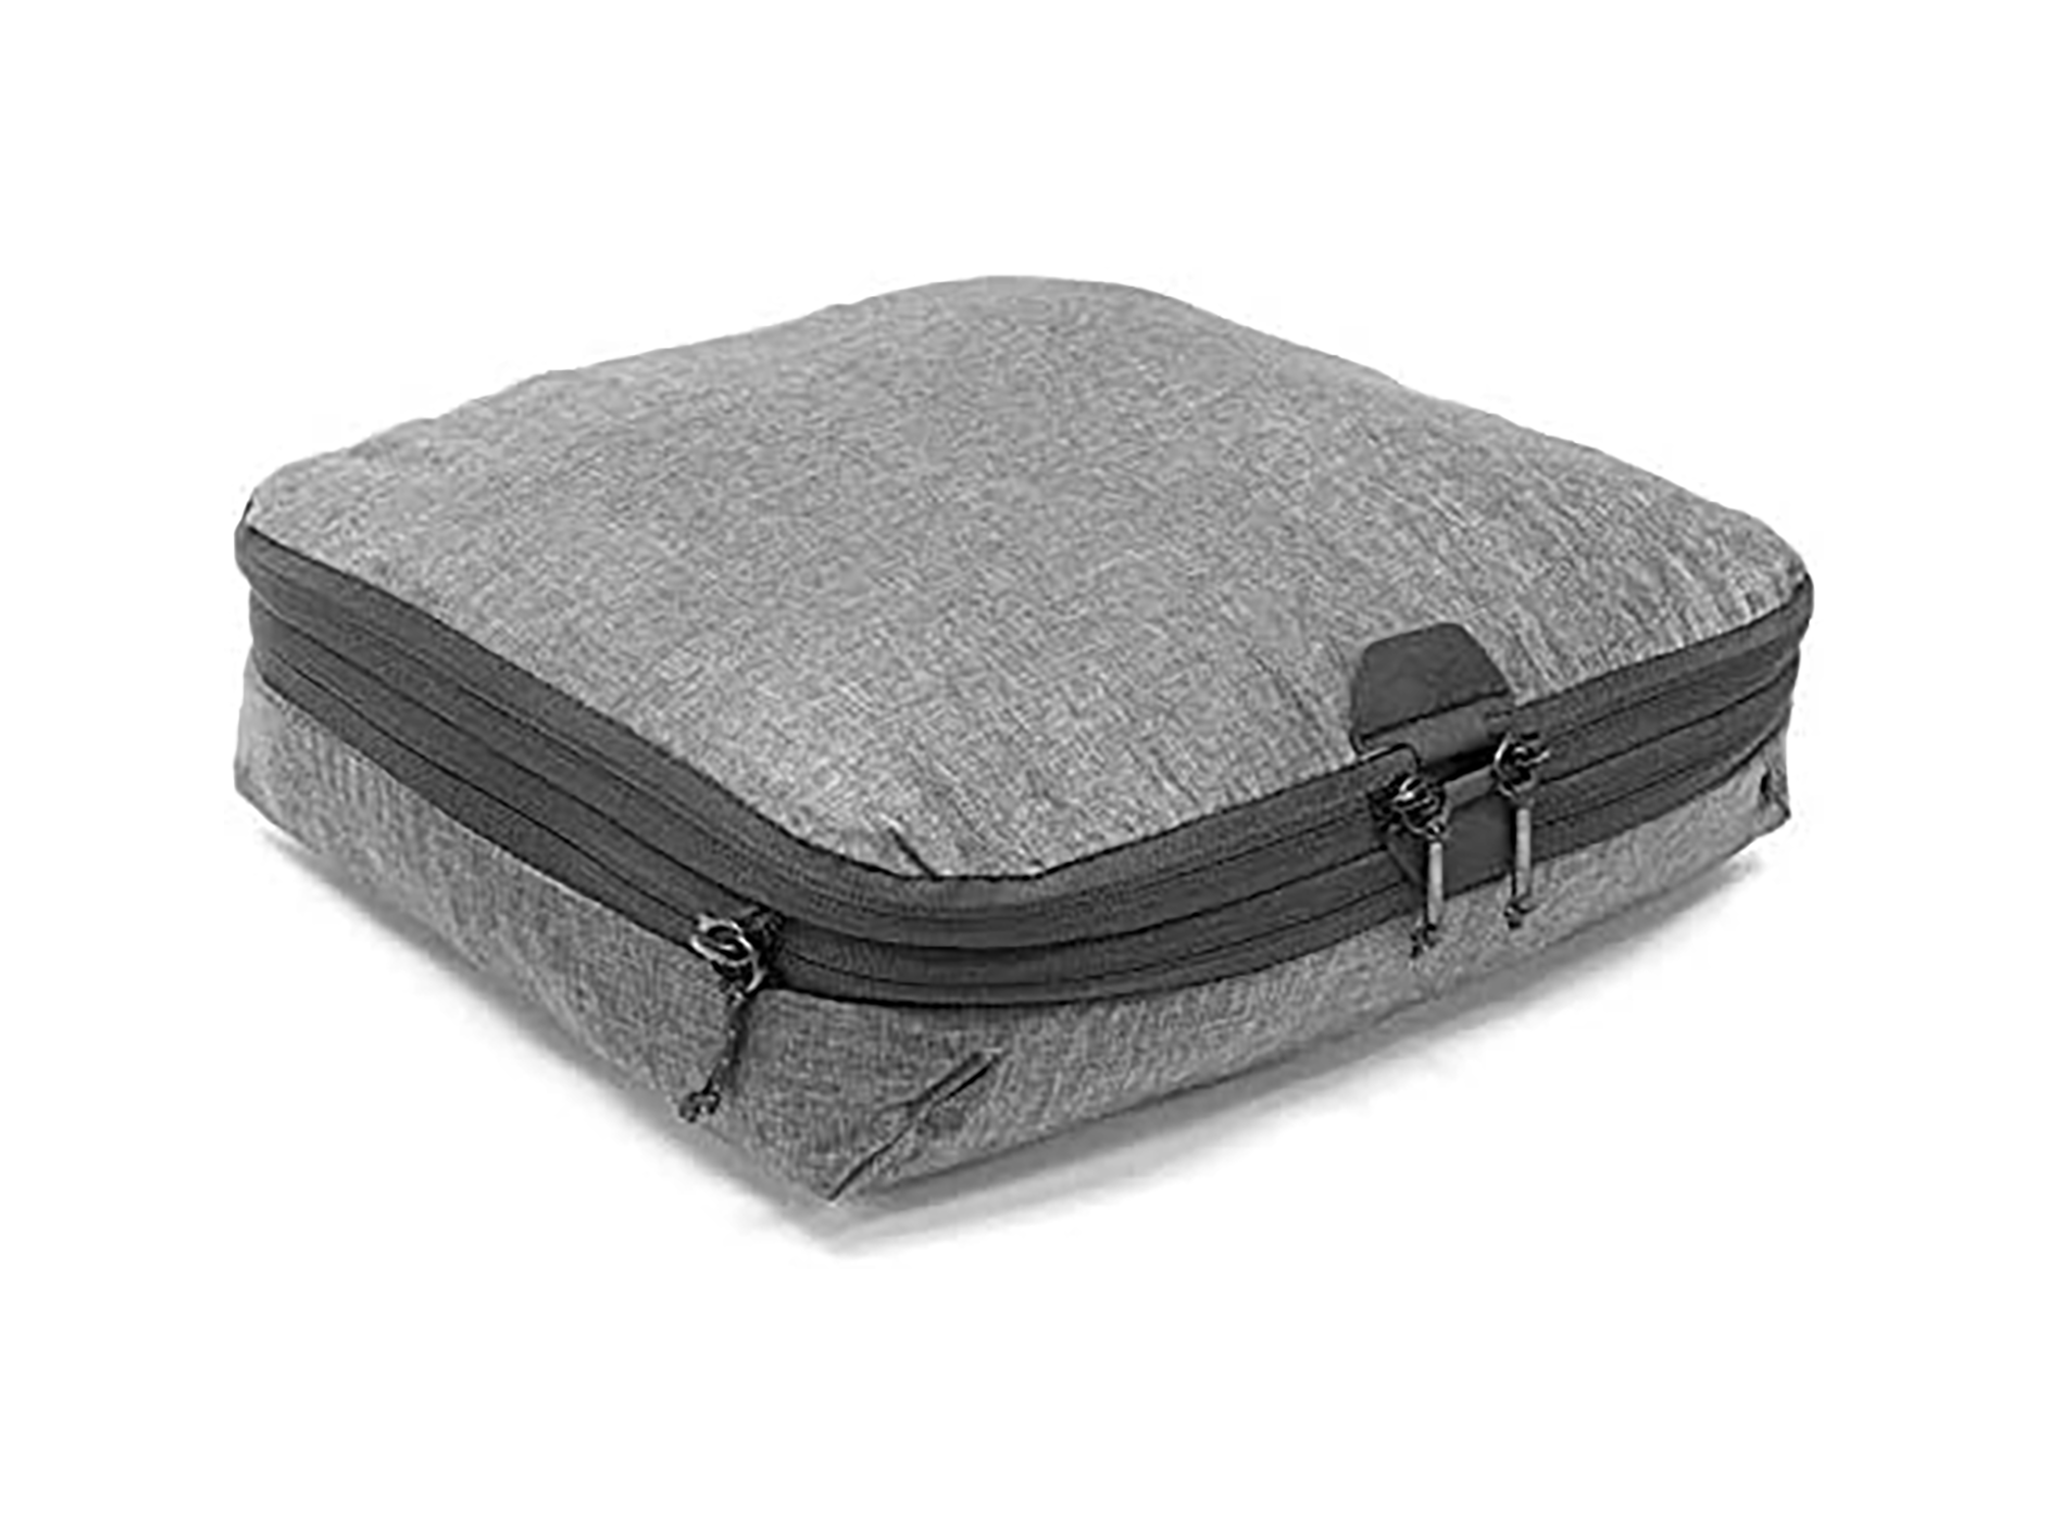 Why Ultralight Compression Packing Cubes? – Bagail